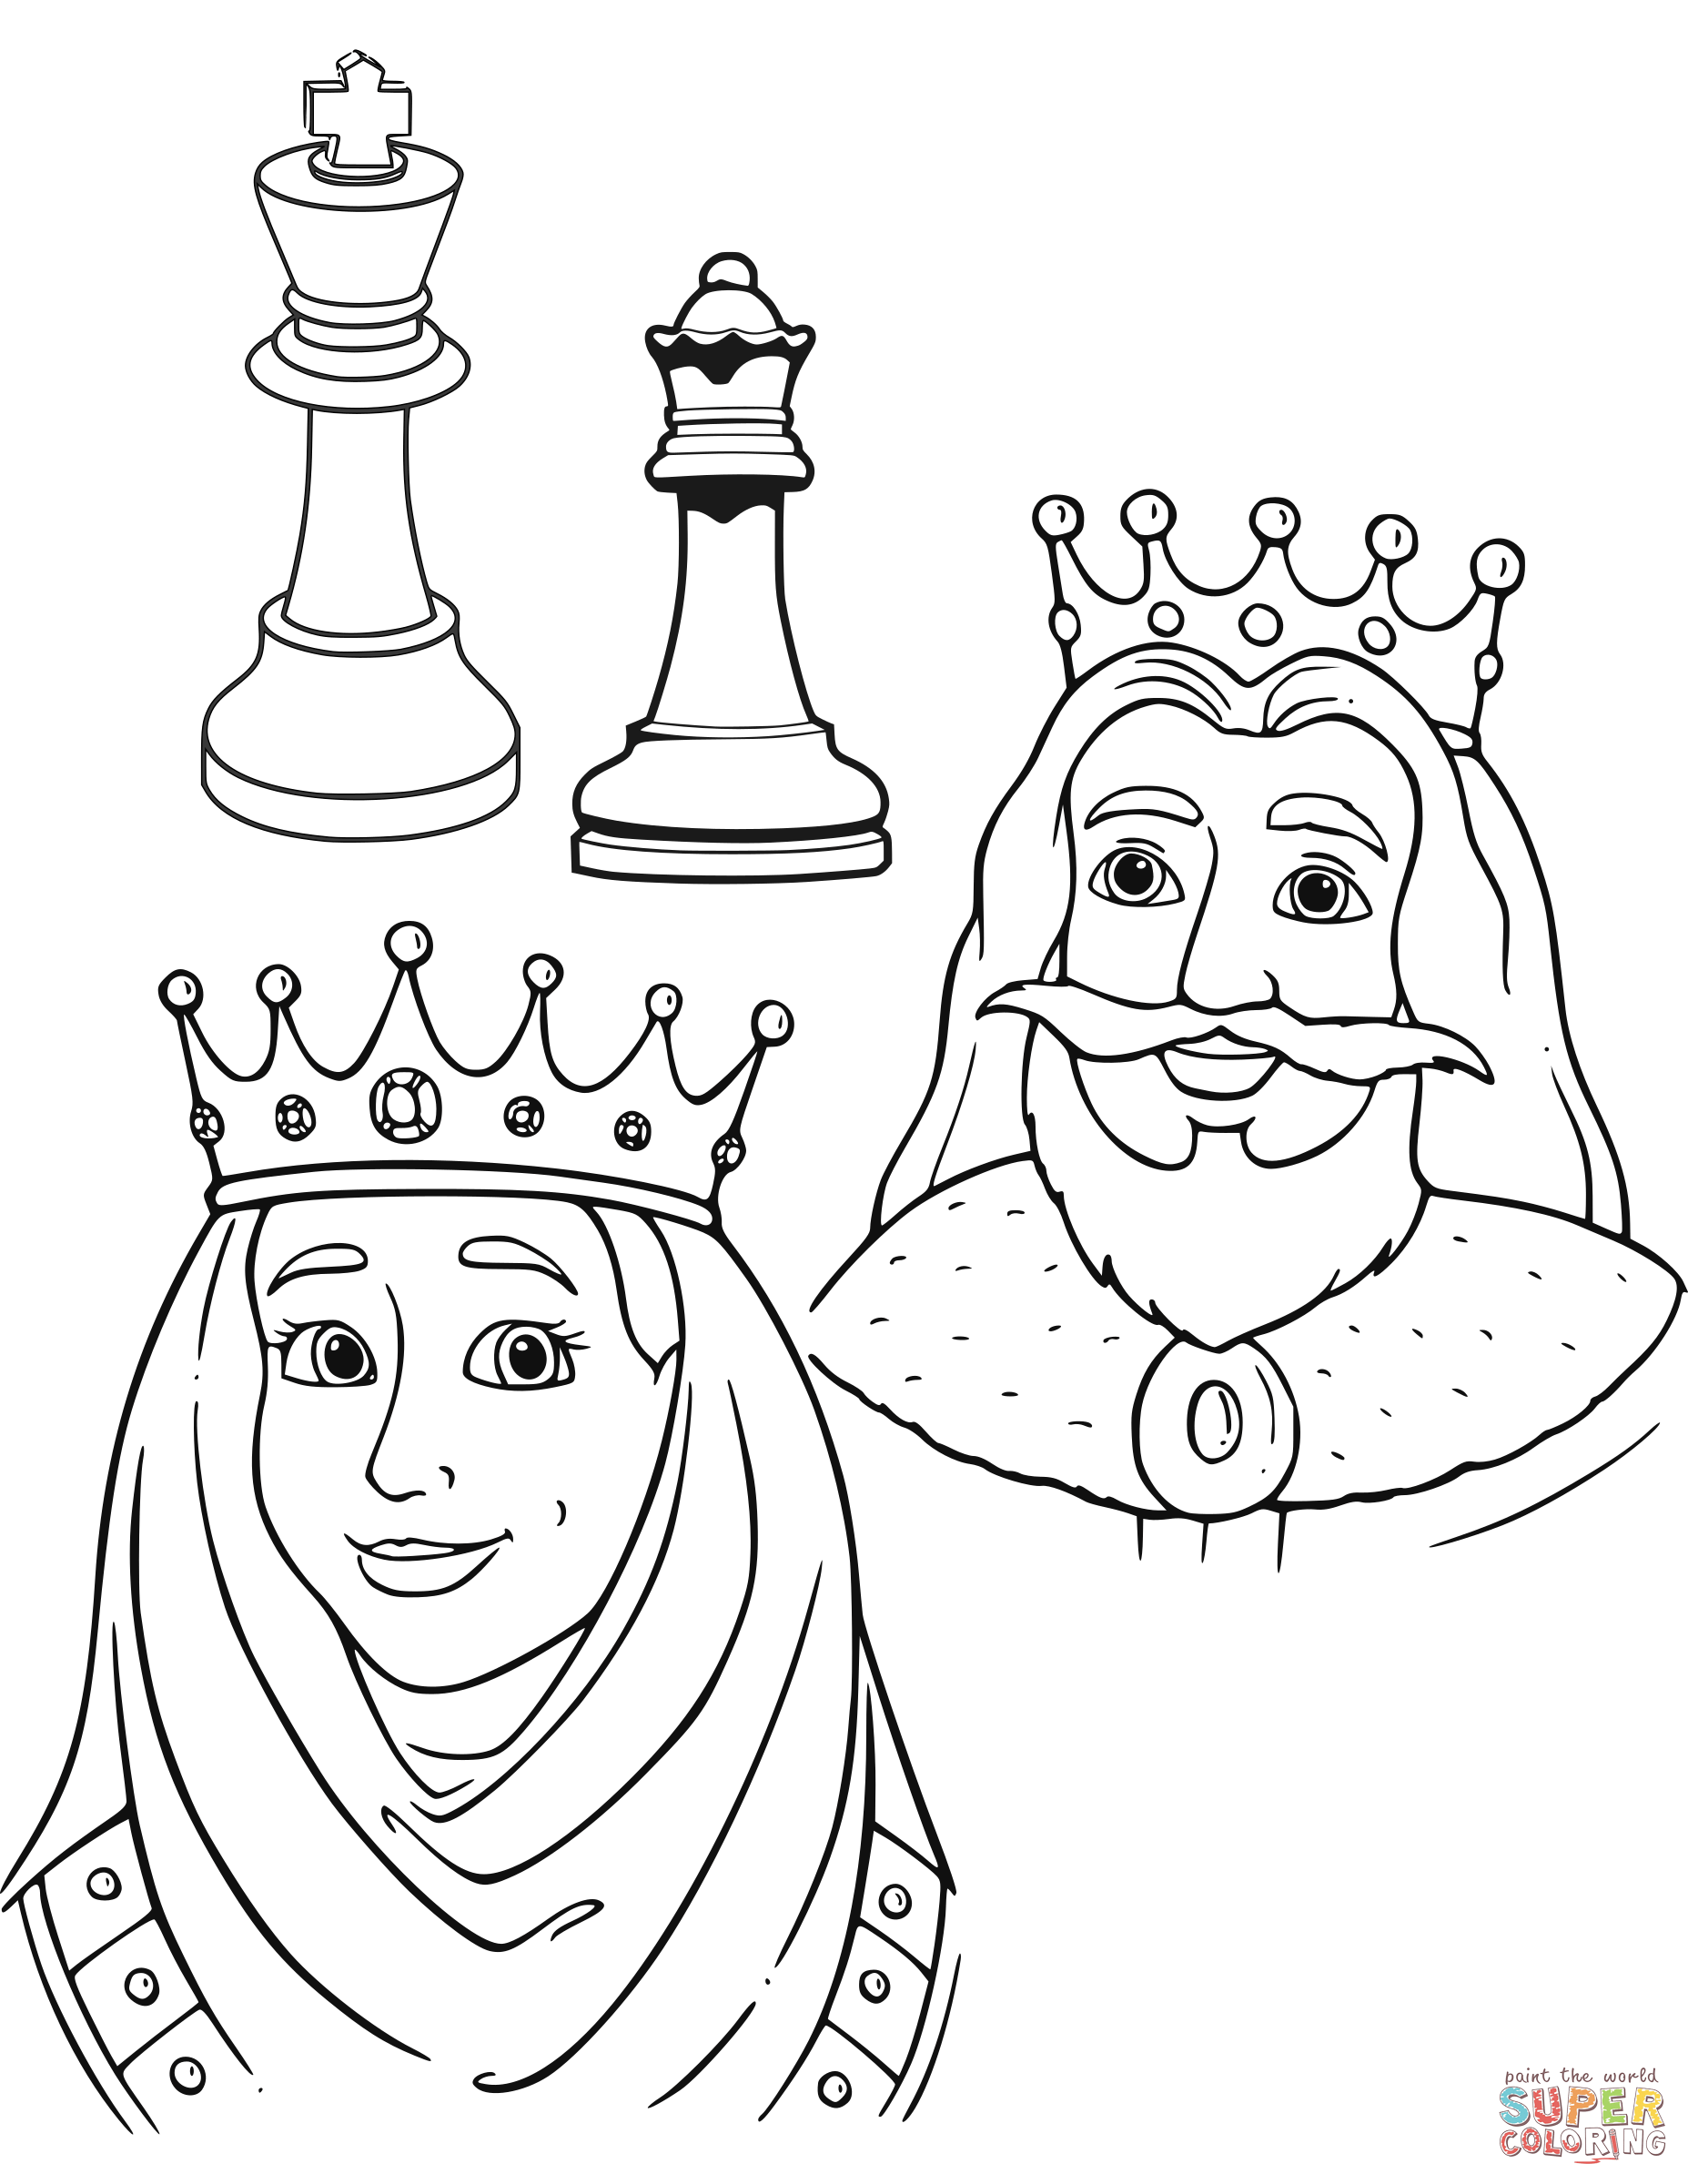 King And Queen Coloring Pages.